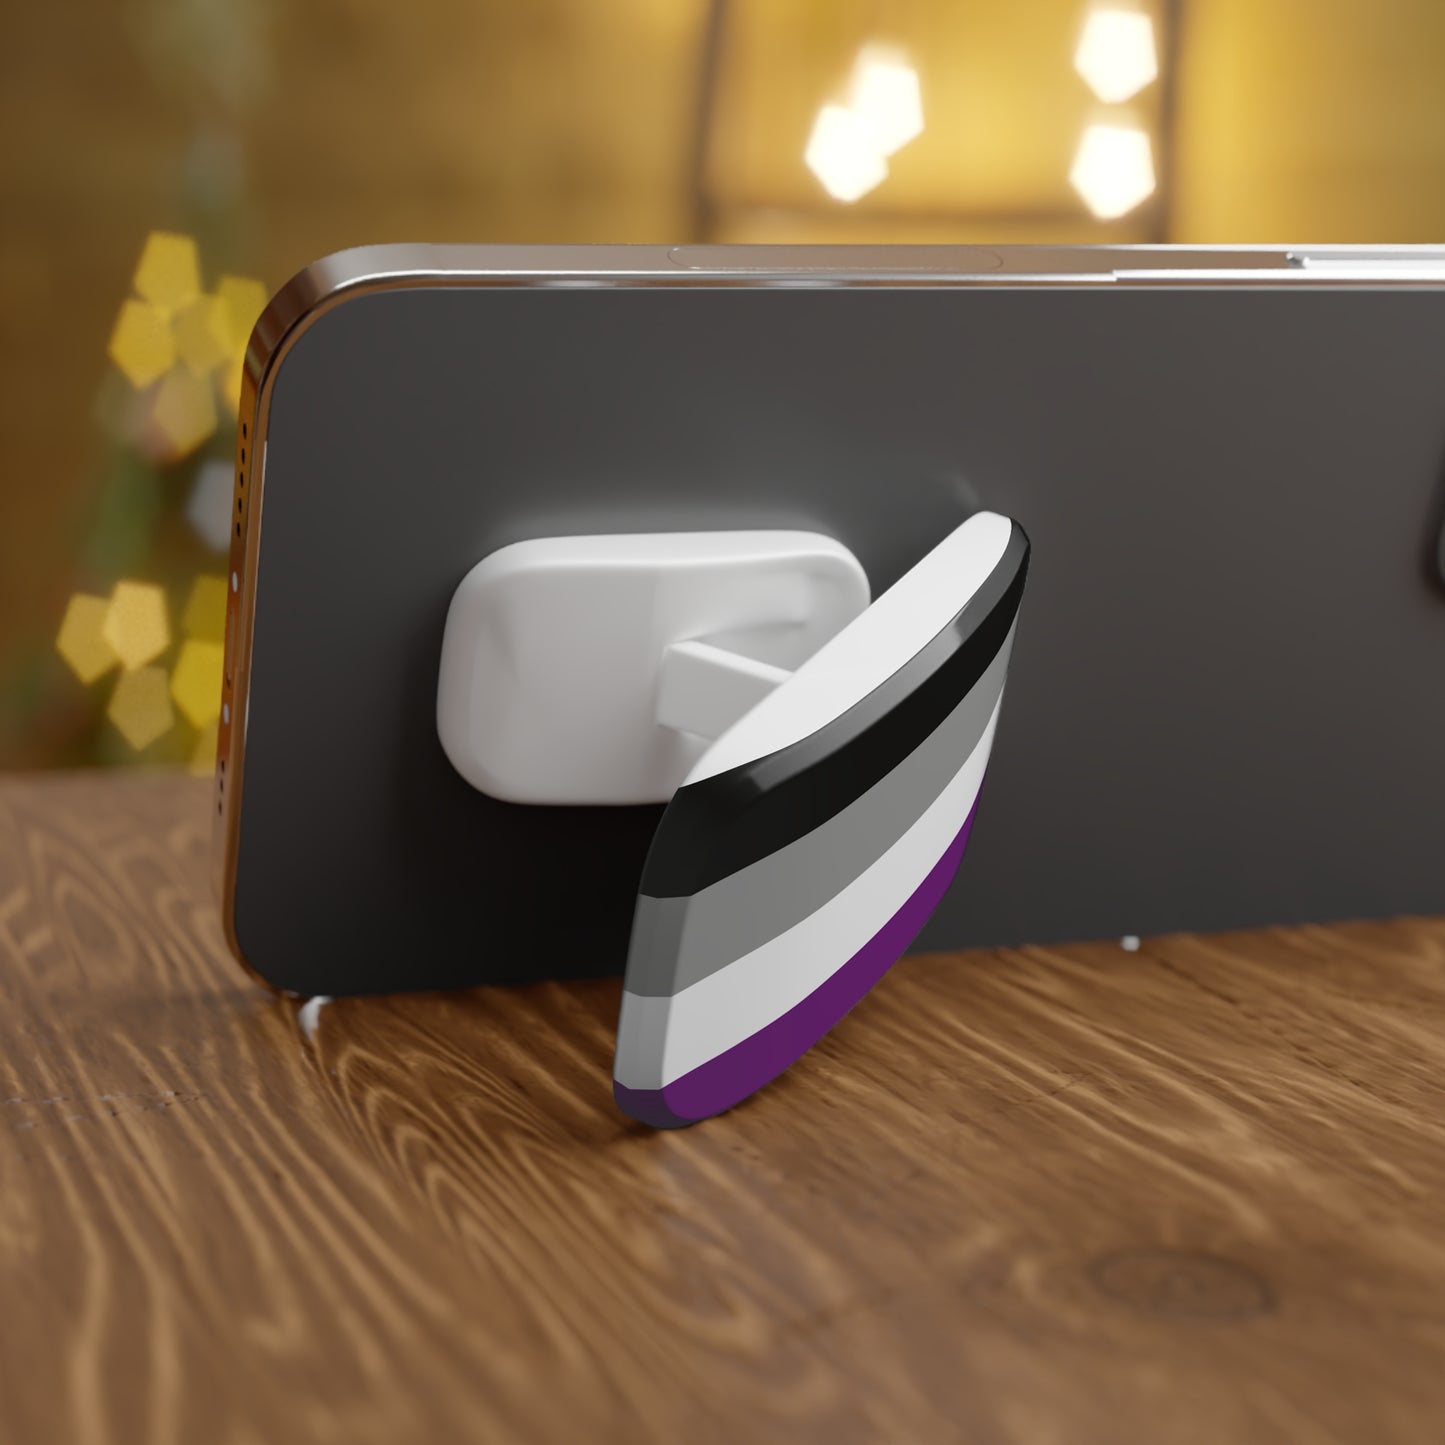 Asexual Pride Phone Click-On Grip